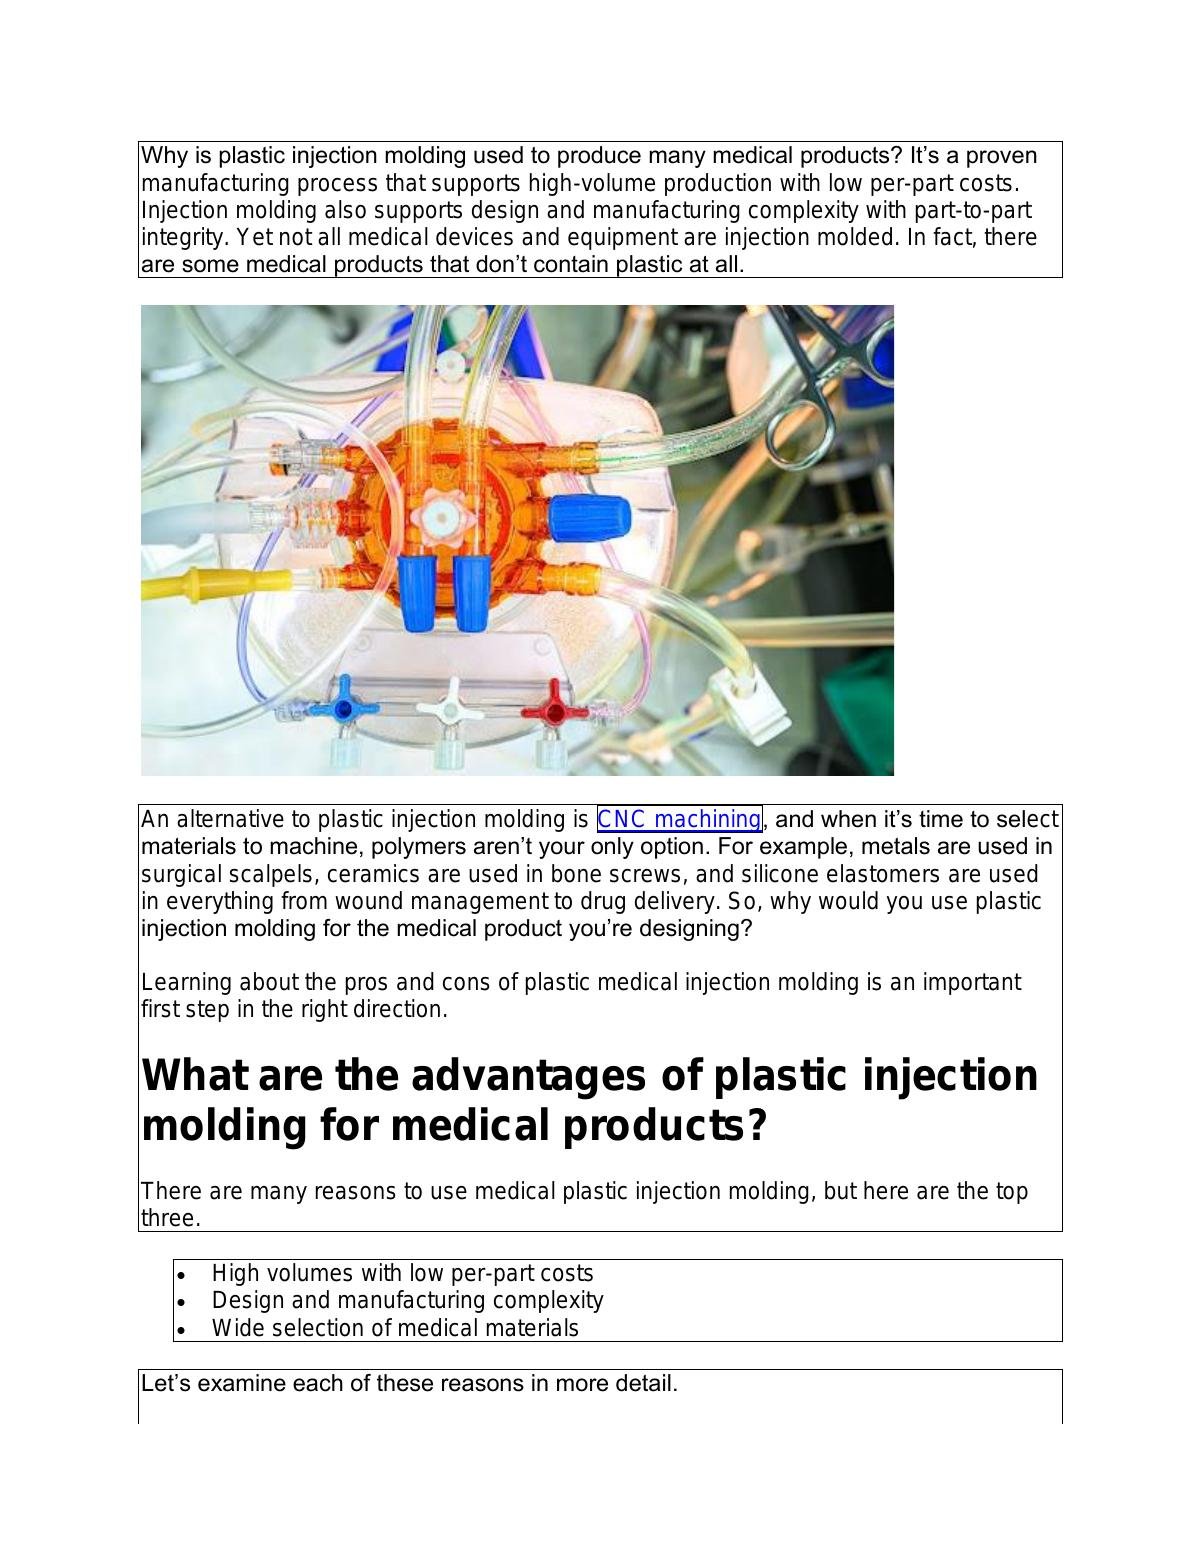 Pros & Cons of Plastic Injection Molding for Medical Products